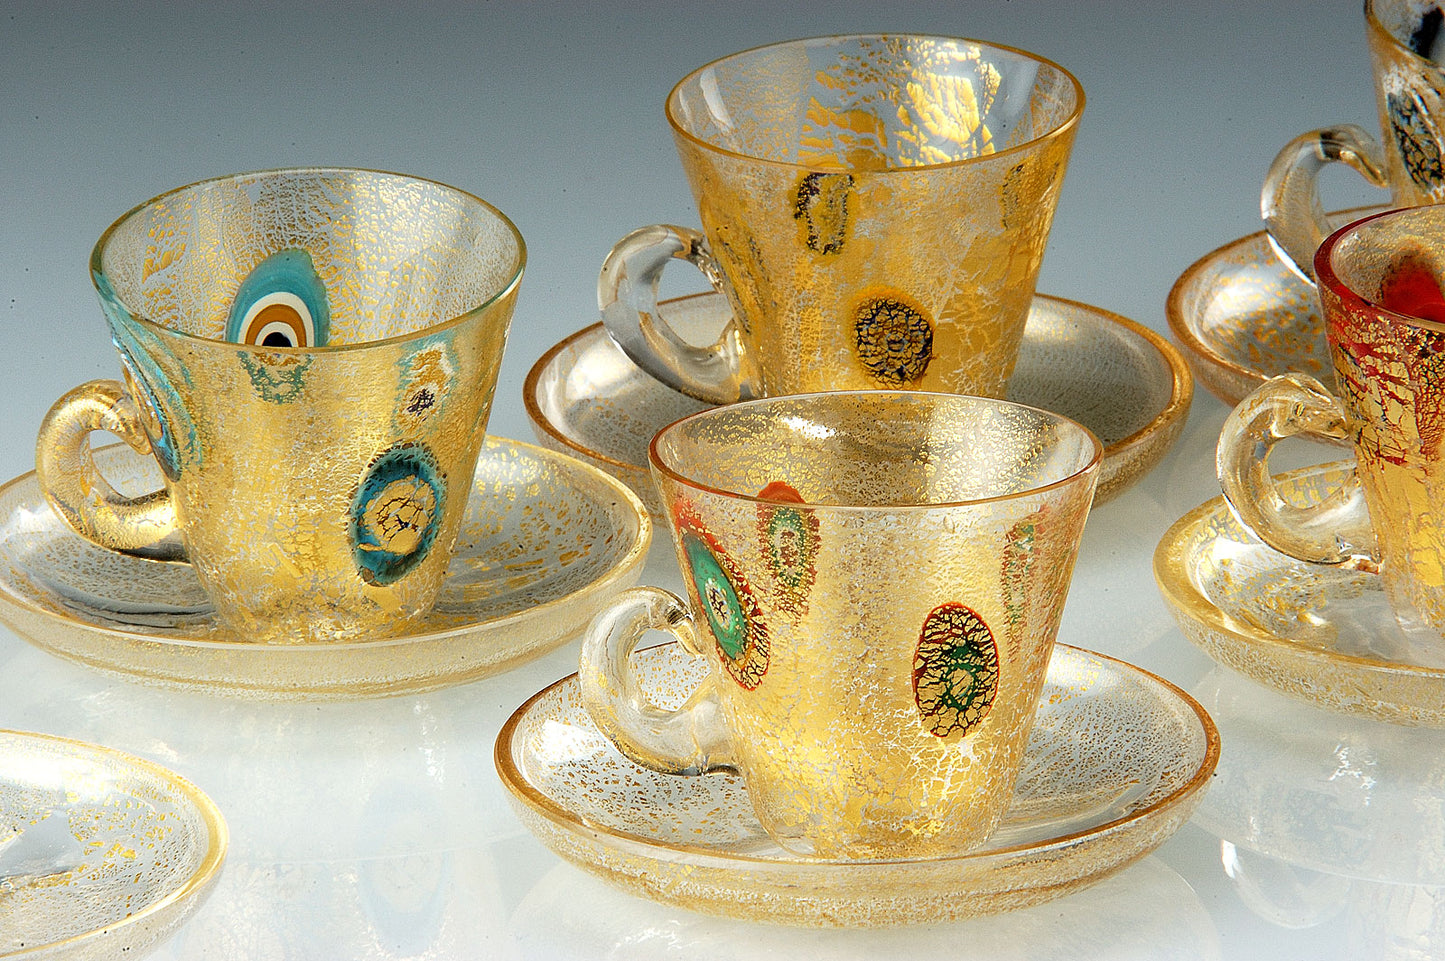 Crystal and gold leaf cups in Murano glass - Vetri D'Arte